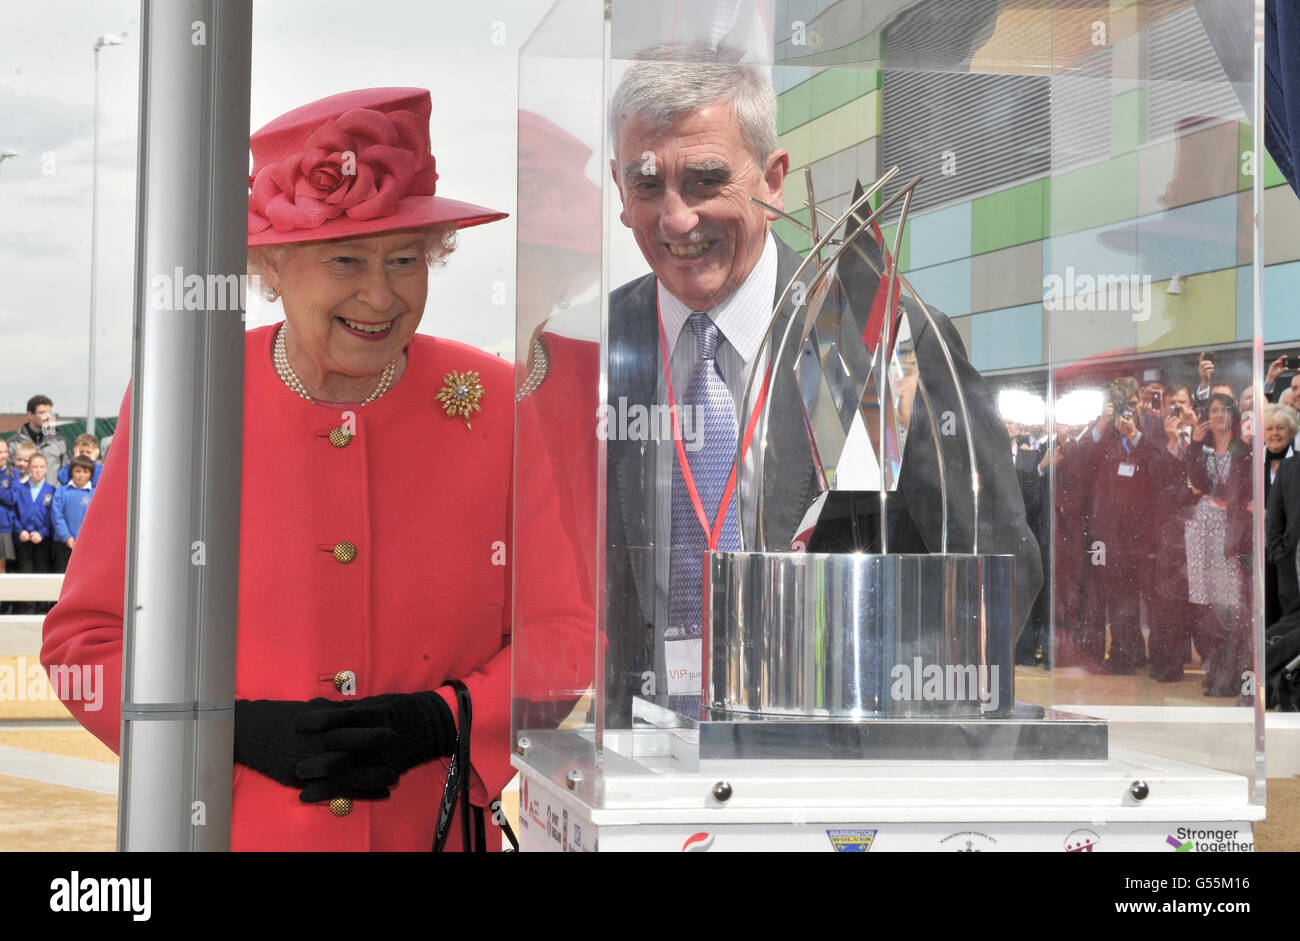 Queen Elizabeth II unveils a sculpture during her visit to Orford Jubilee Park with Cllr Terry O'Neil leader of Warrington Borough Council, Warrington as part of her visit to the north west. Stock Photo